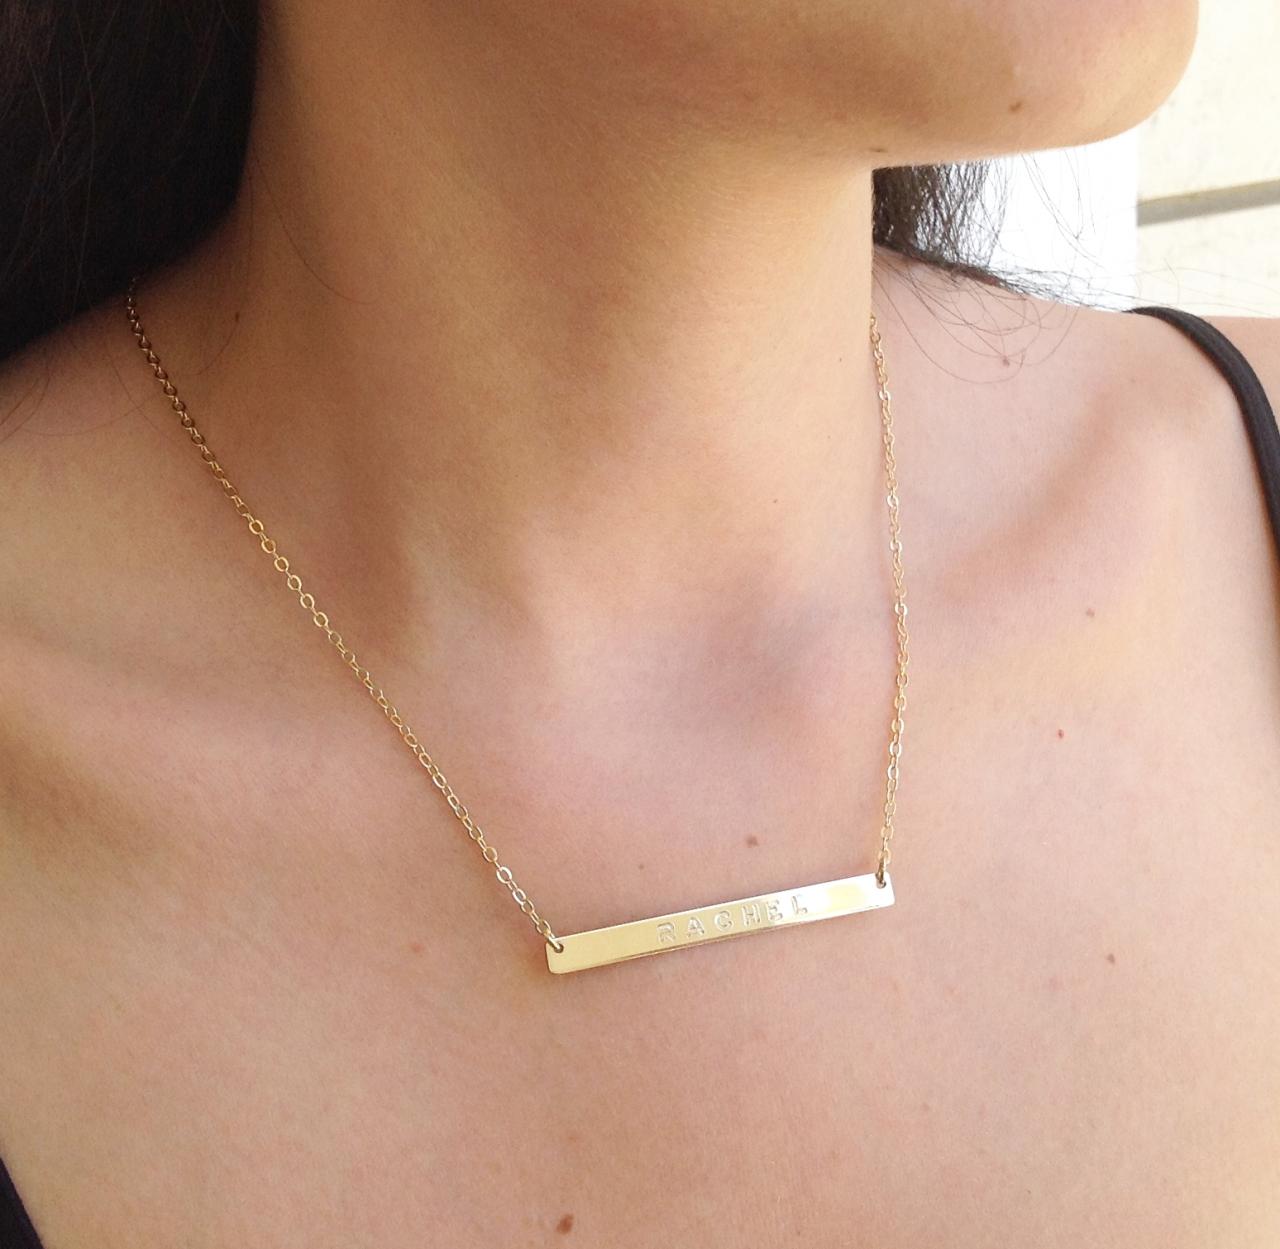 Personalized bar necklace, gold nameplate necklace, custom bar necklace, gold filled necklace B014